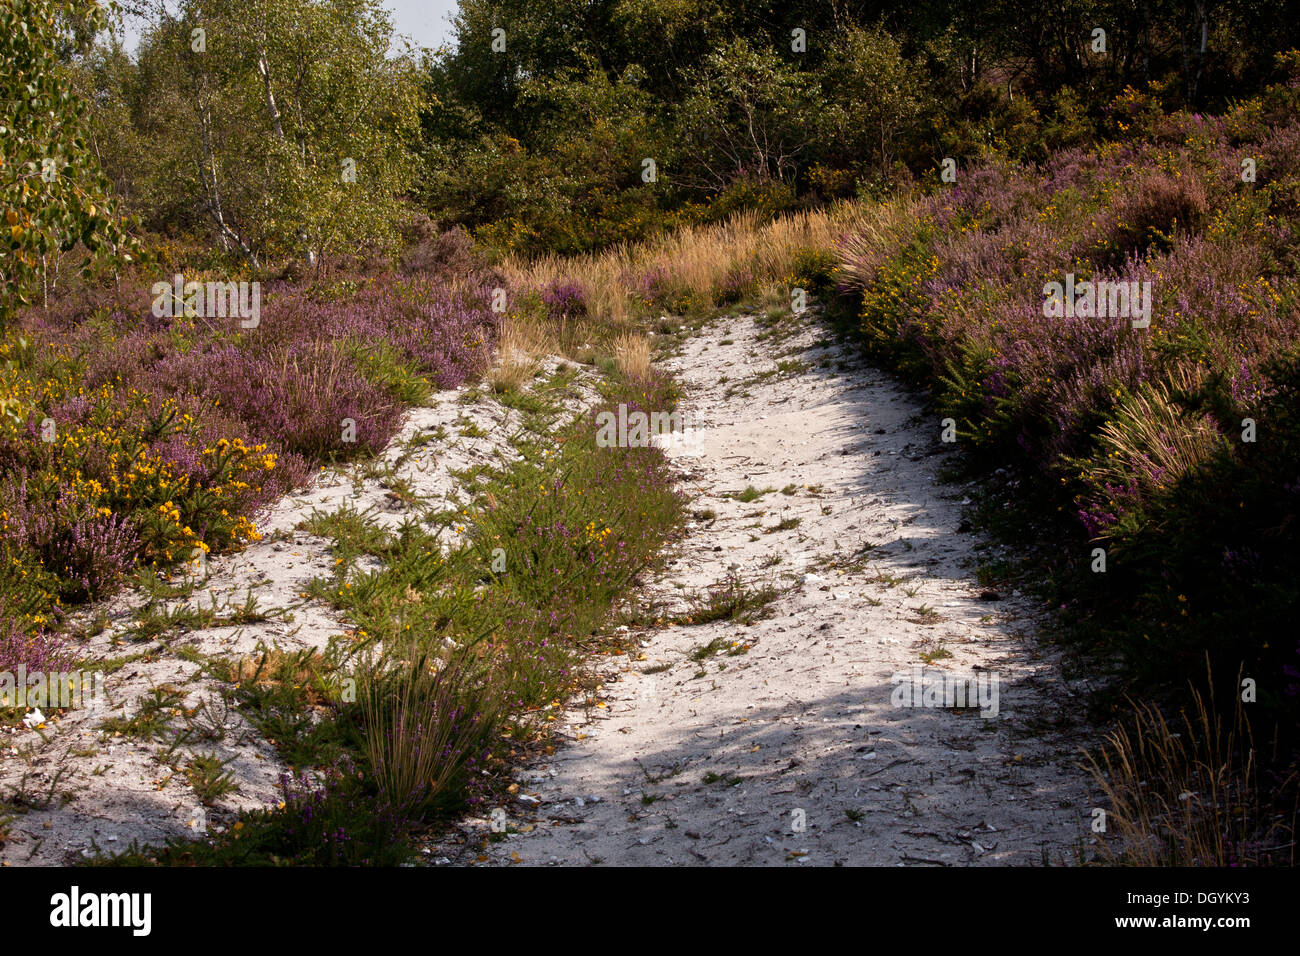 Management of heathland for reptiles, by ARC on Dunyeats Hill, Dorset. Stock Photo